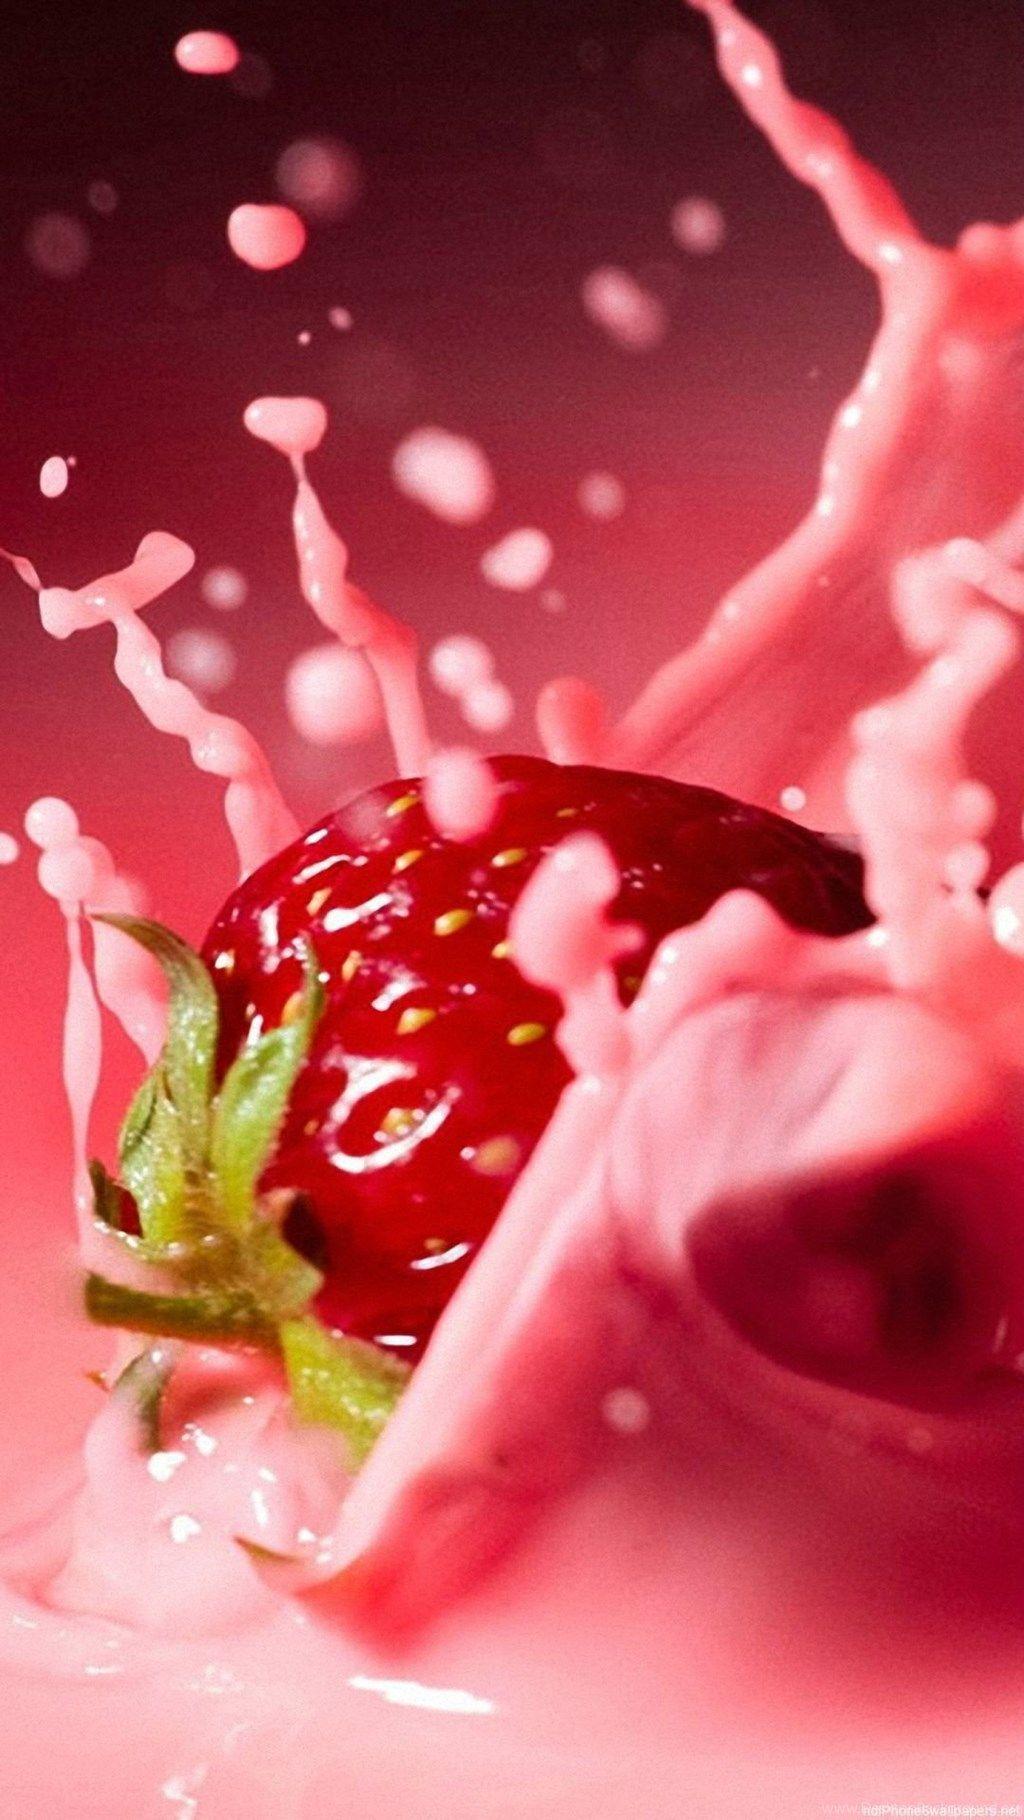 Strawberry Milk Fruit Abstract iPhone 6 Wallpaper HD And 1080P 6